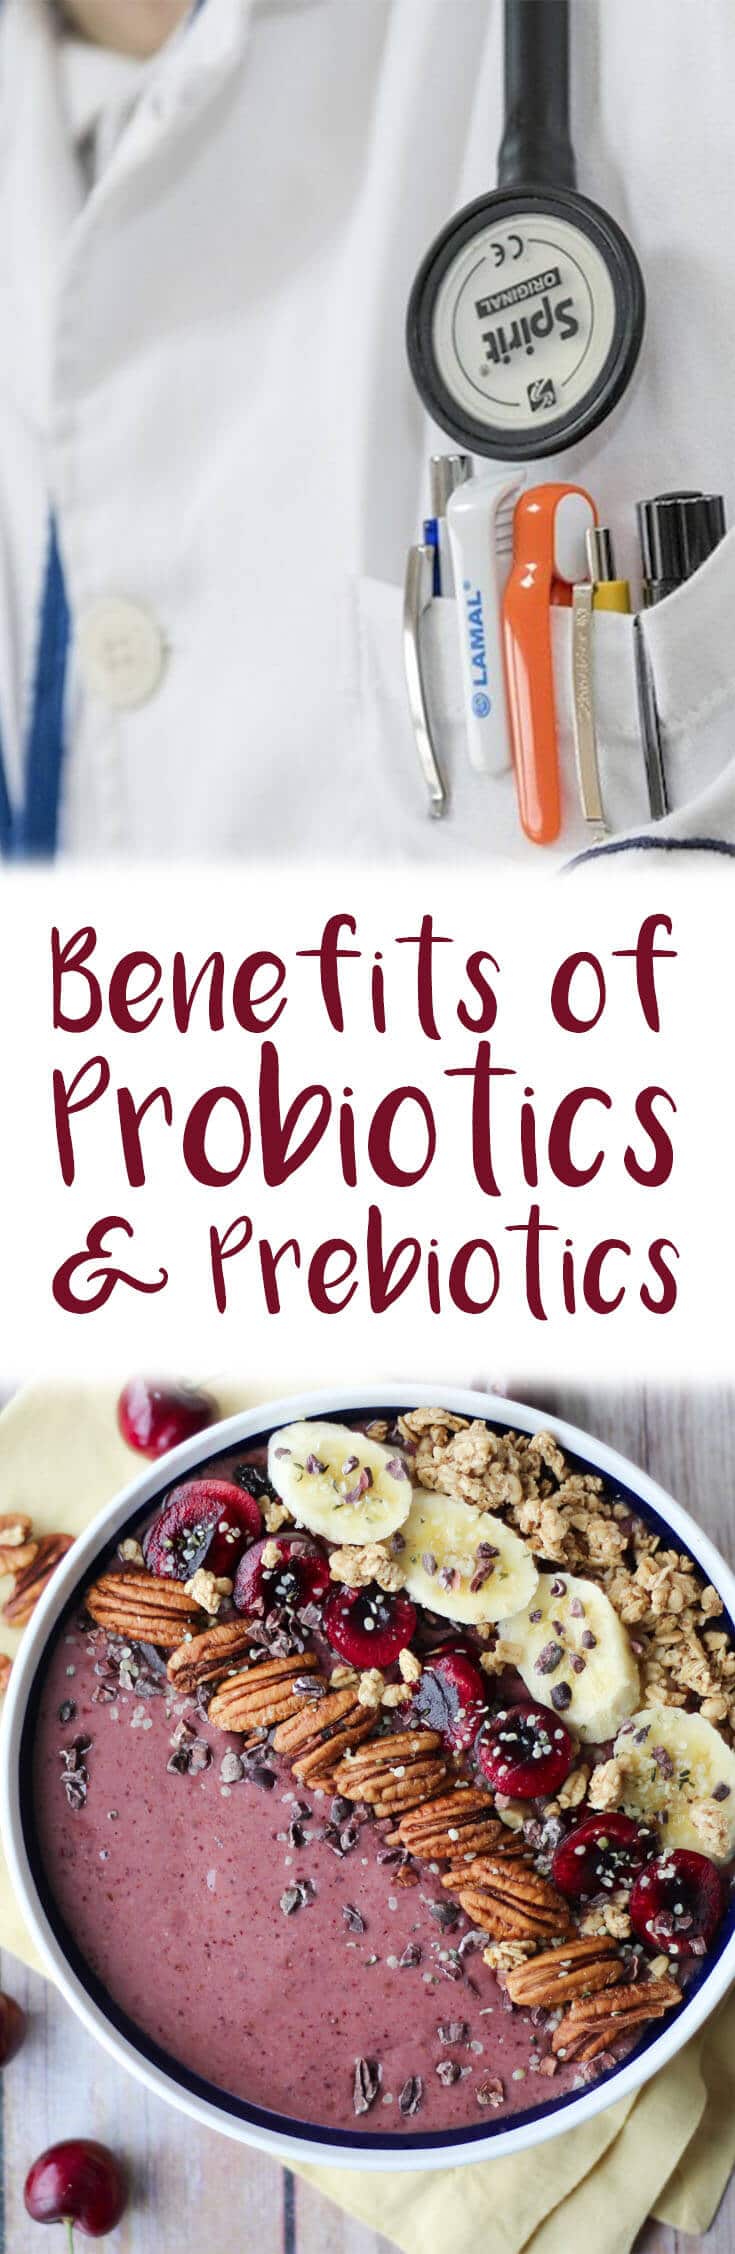 I discuss new research on the health benefits on probiotics and prebiotics and discuss how healthy gut bacteria is important for digestive health